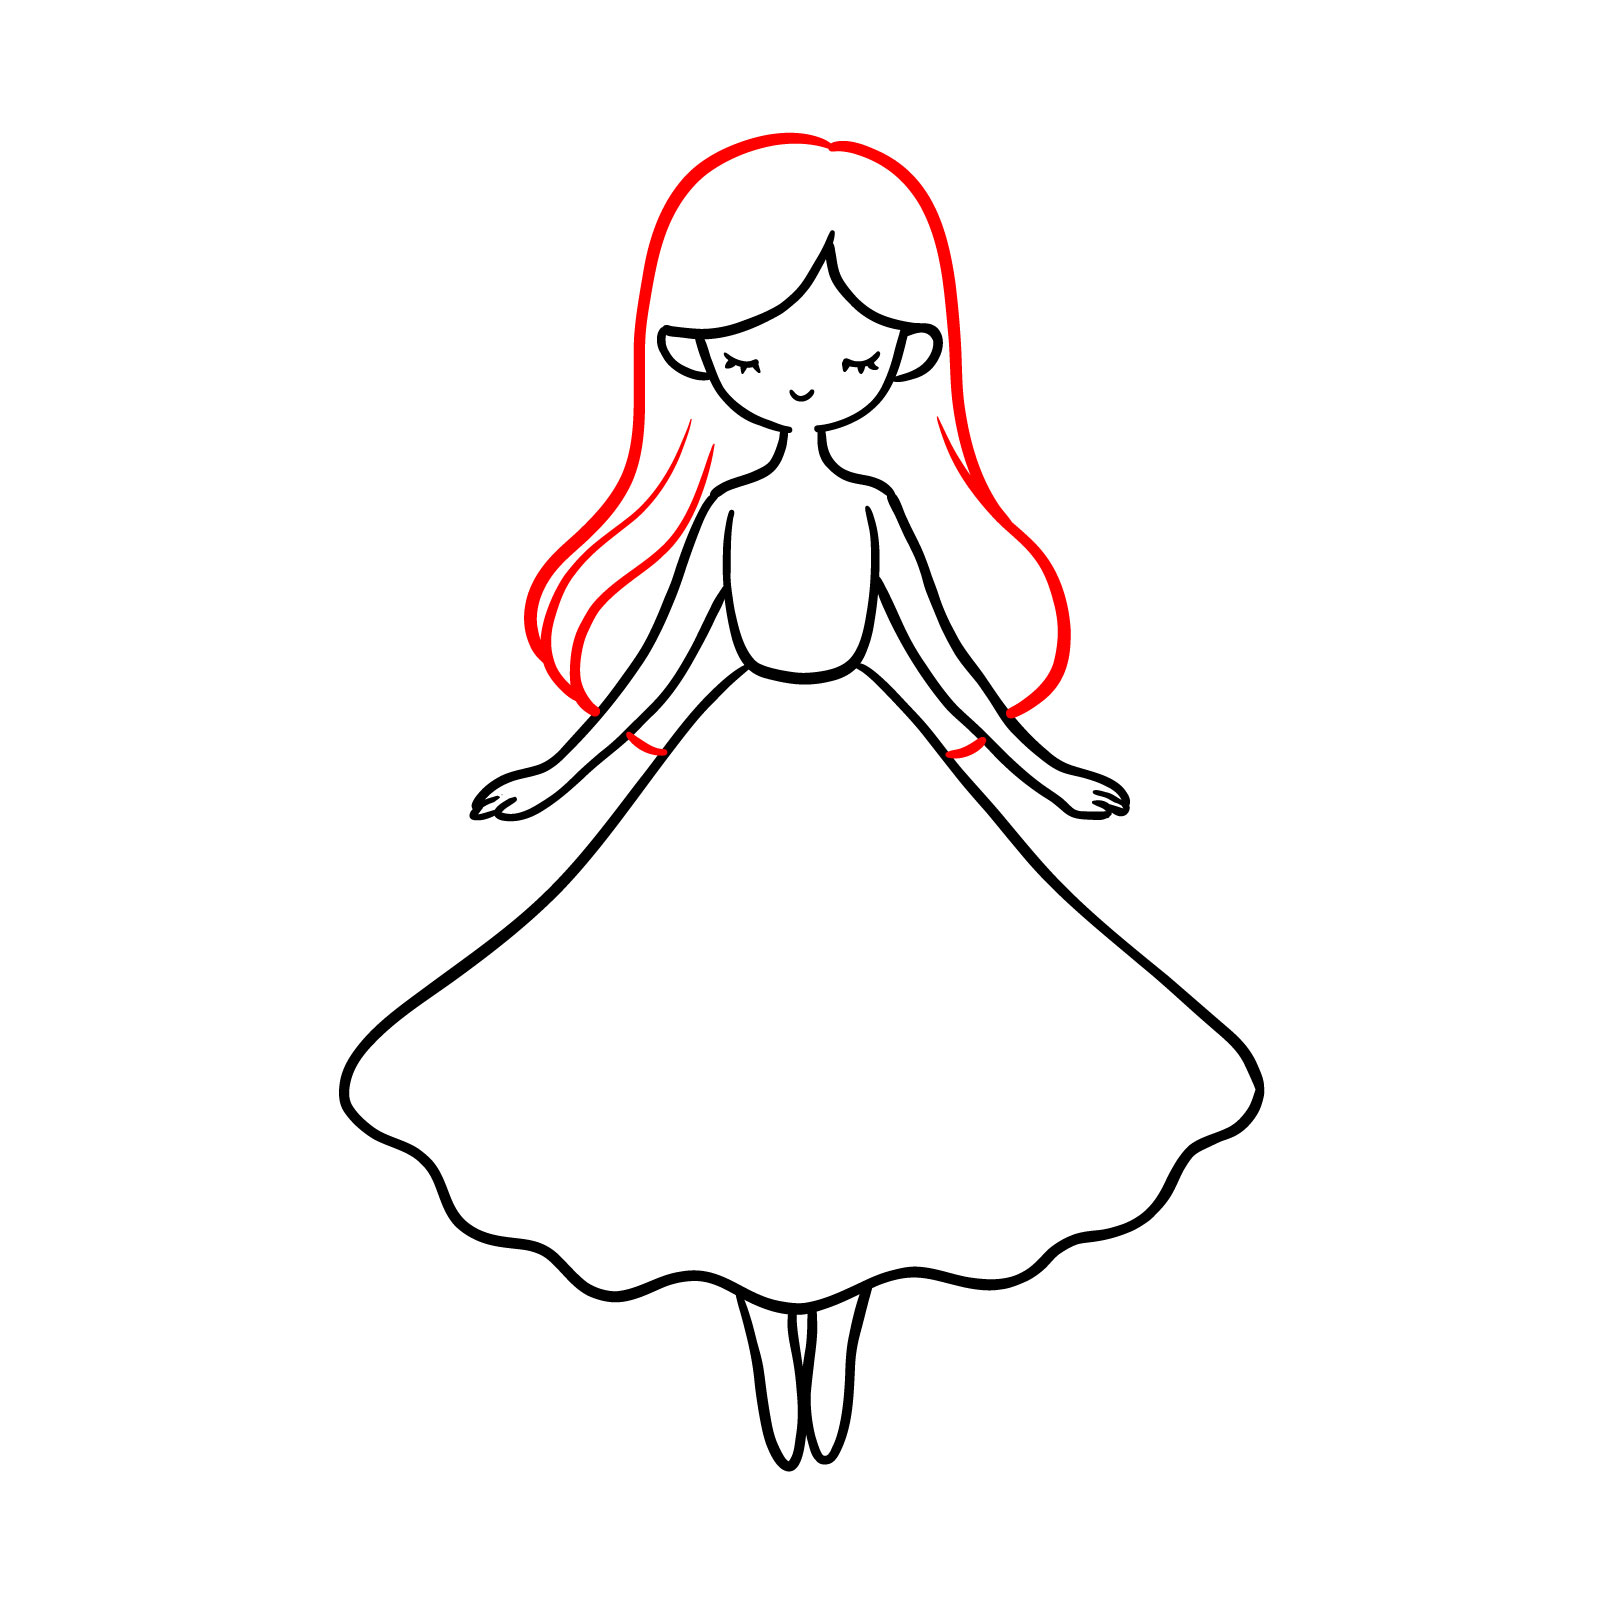 Easy fairy drawing - depict long, flowing hair - step 08